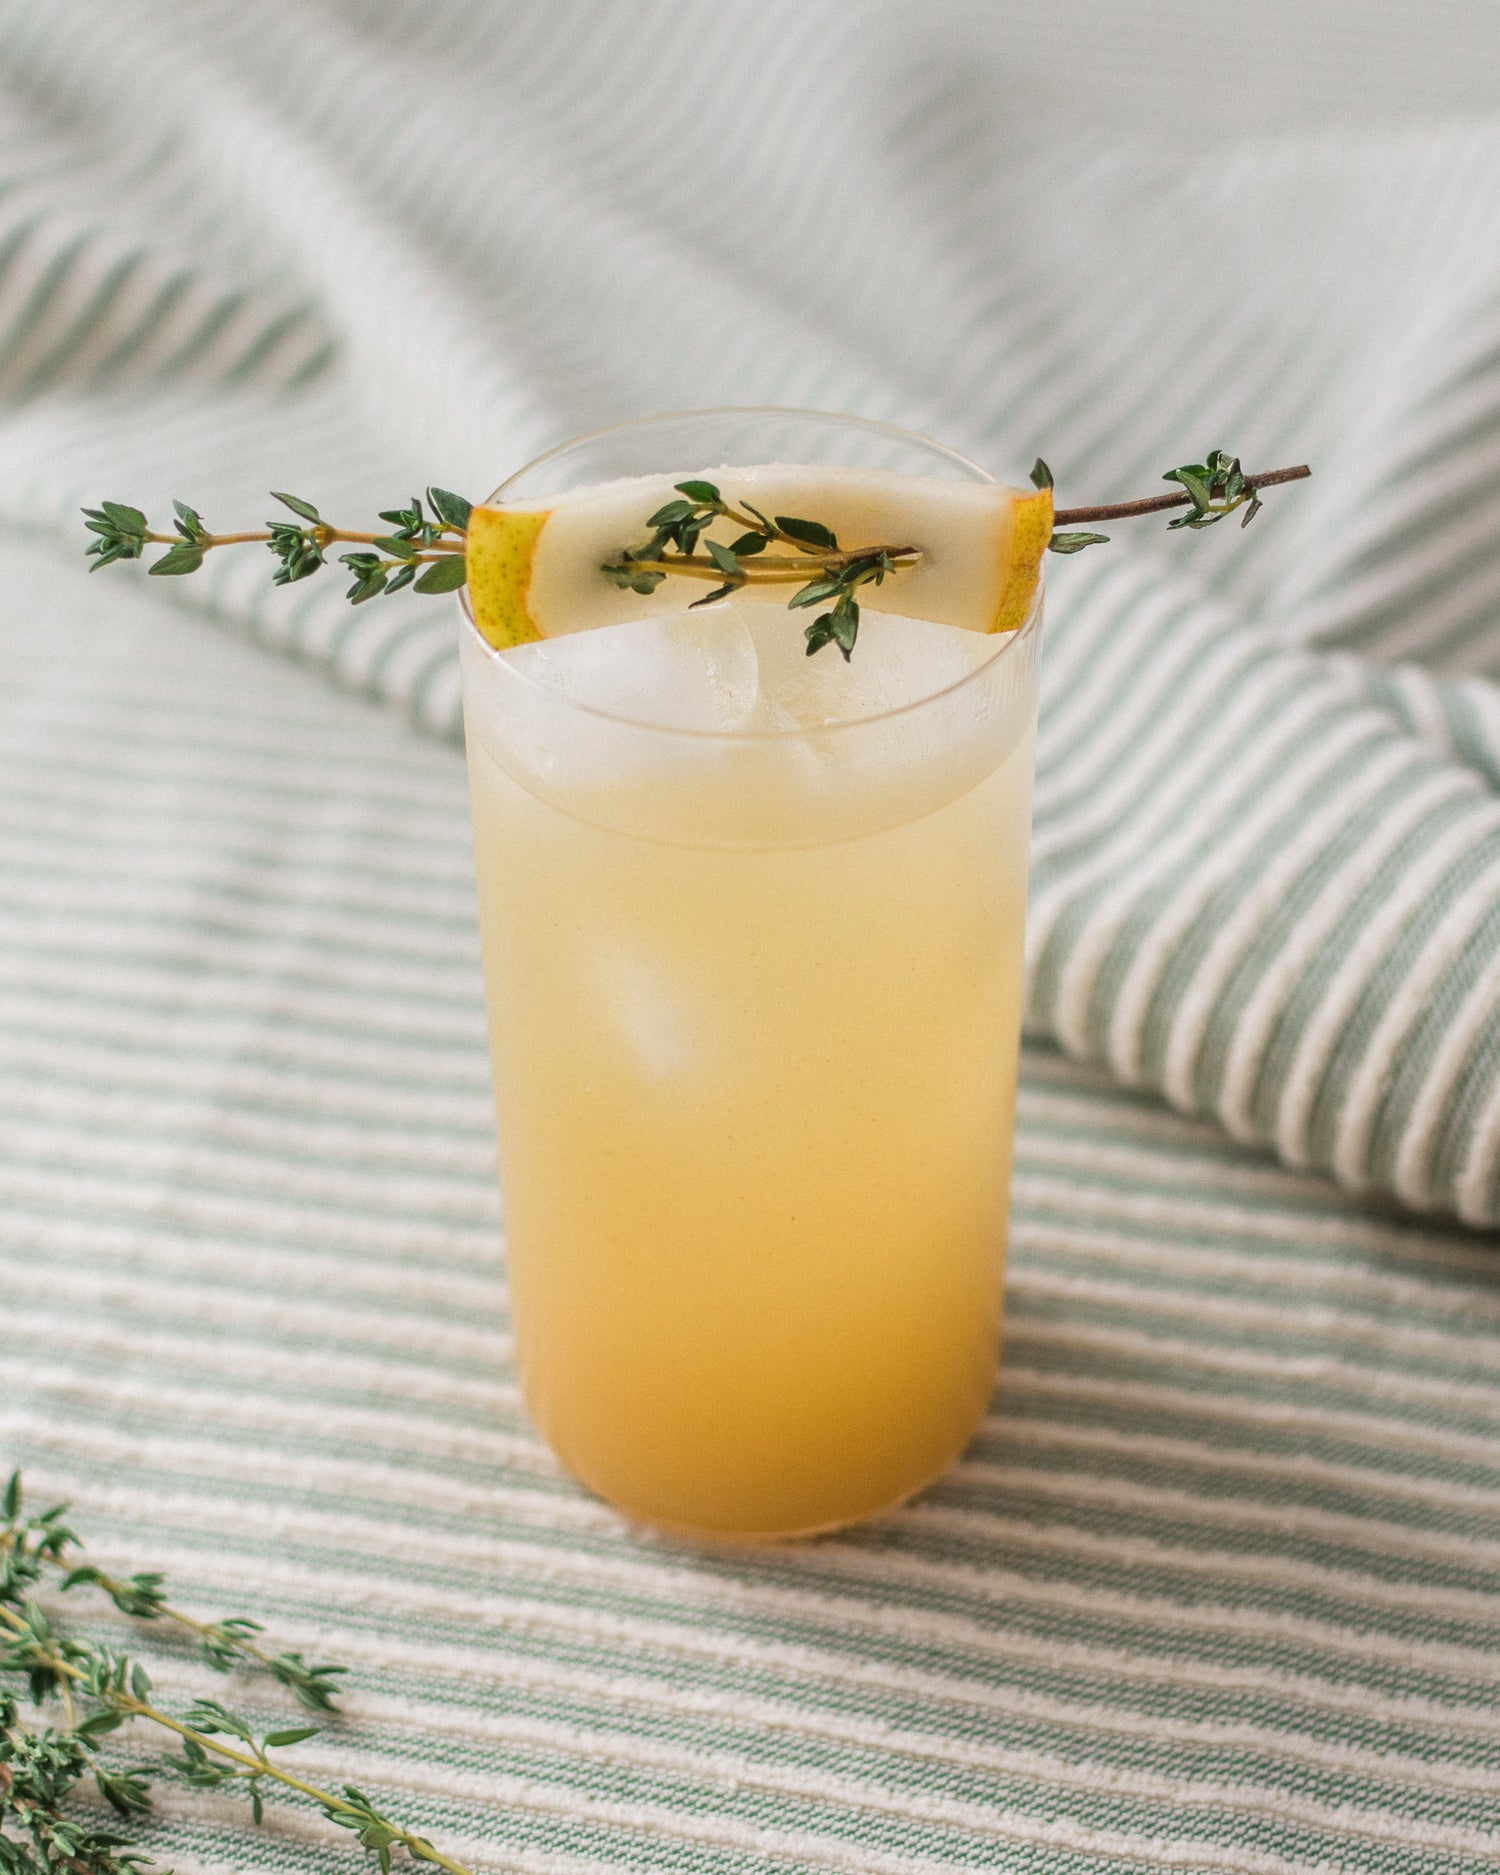 The Pear-fect Mocktail